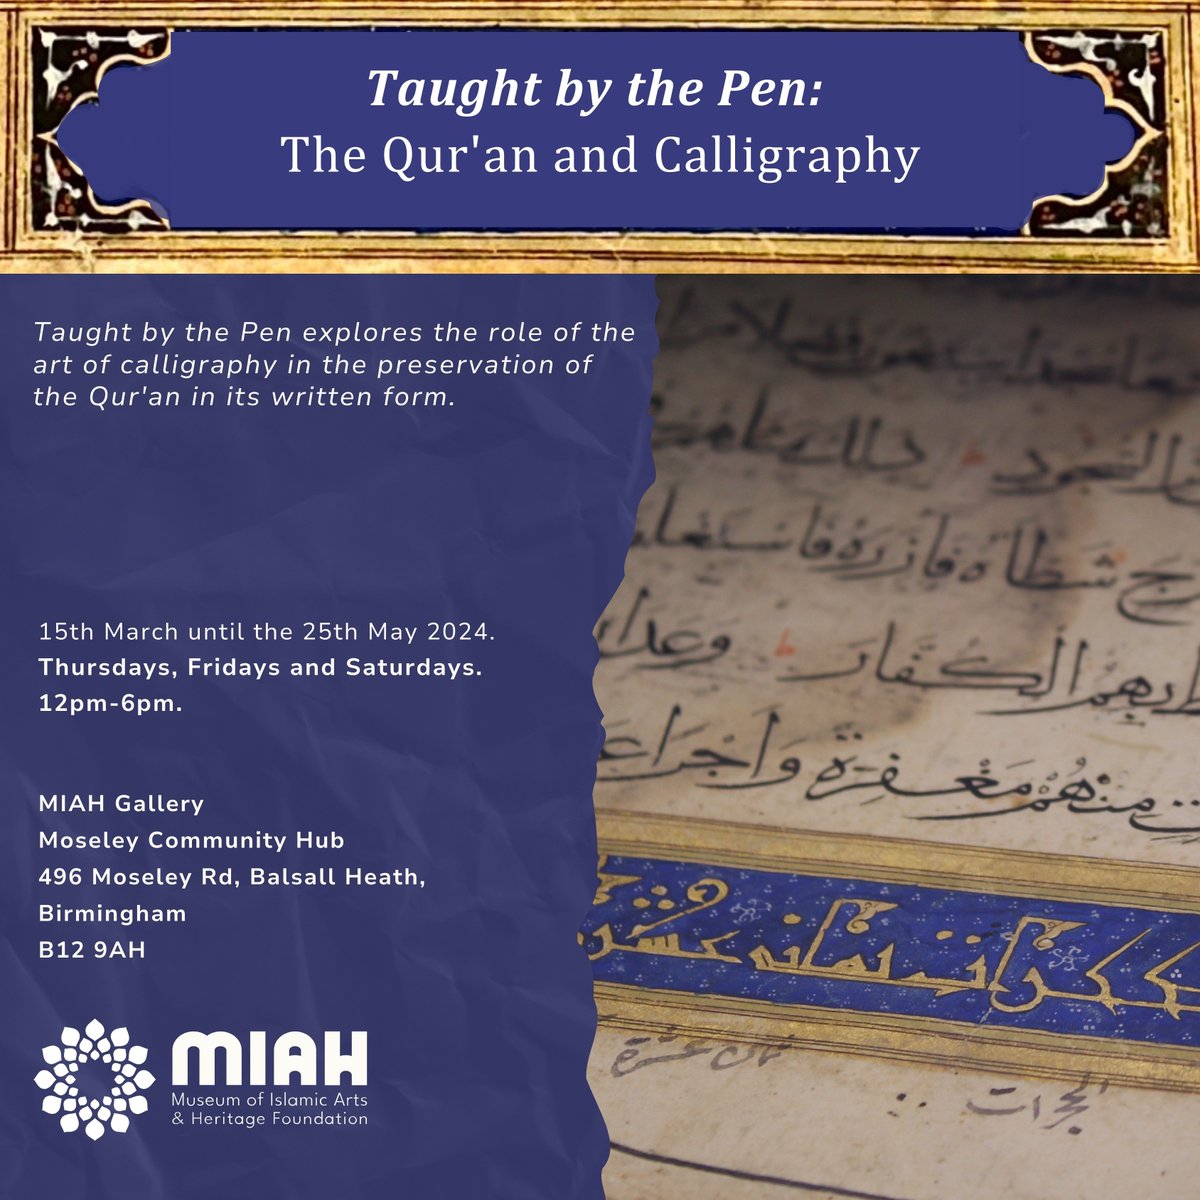 Taught by the Pen: the Qur'an and Calligraphy Please share and spread the word, look forward to seeing you there! Follow the link in below to register. miahfoundation.com/events/exhibit…